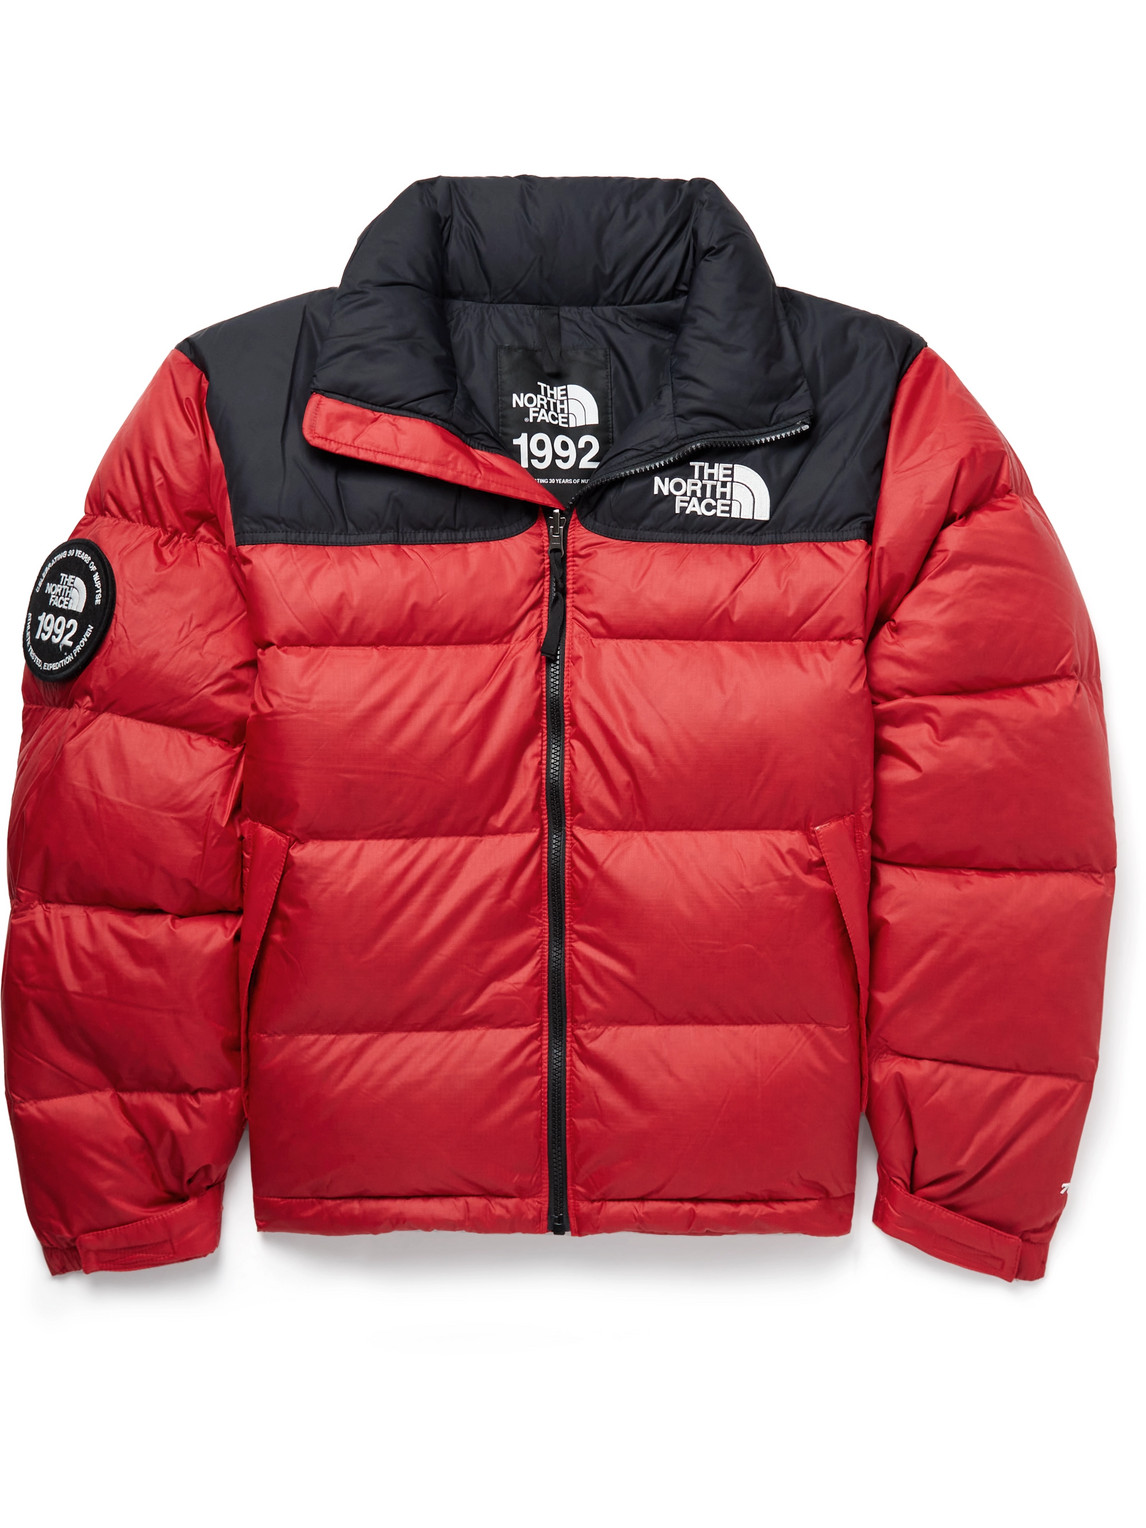 The North Face Retro Nuptse Jacket In Red | ModeSens